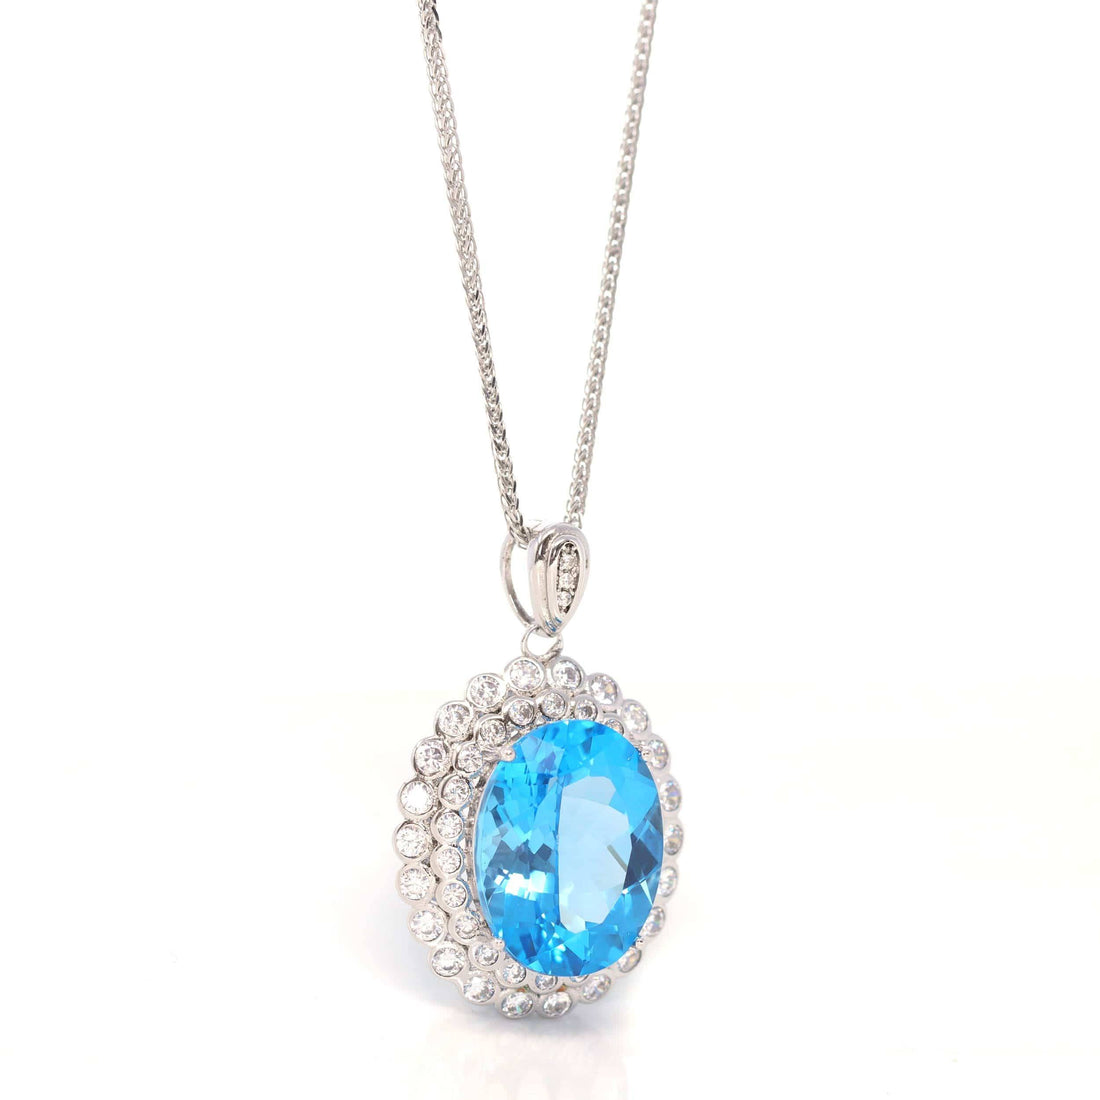 Baikalla Jewelry Silver Topaz Necklace Copy of Sterling Silver Natural Topaz Large Pendant Necklace With CZ